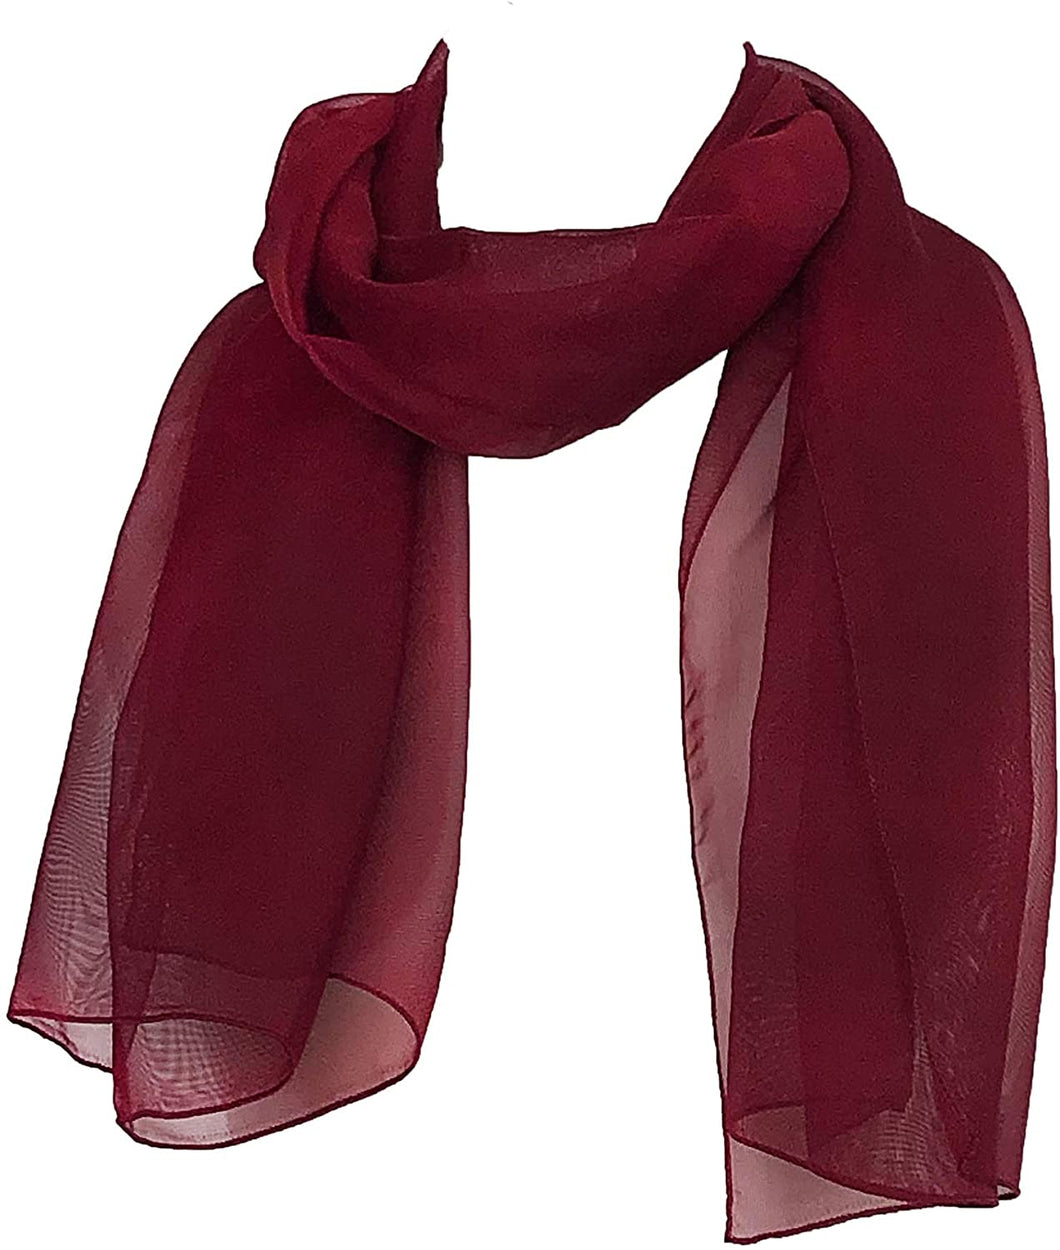 Plain Burgundy Chiffon Style Scarf Thin Pretty Scarf Great for Any Outfit Lovely Gift